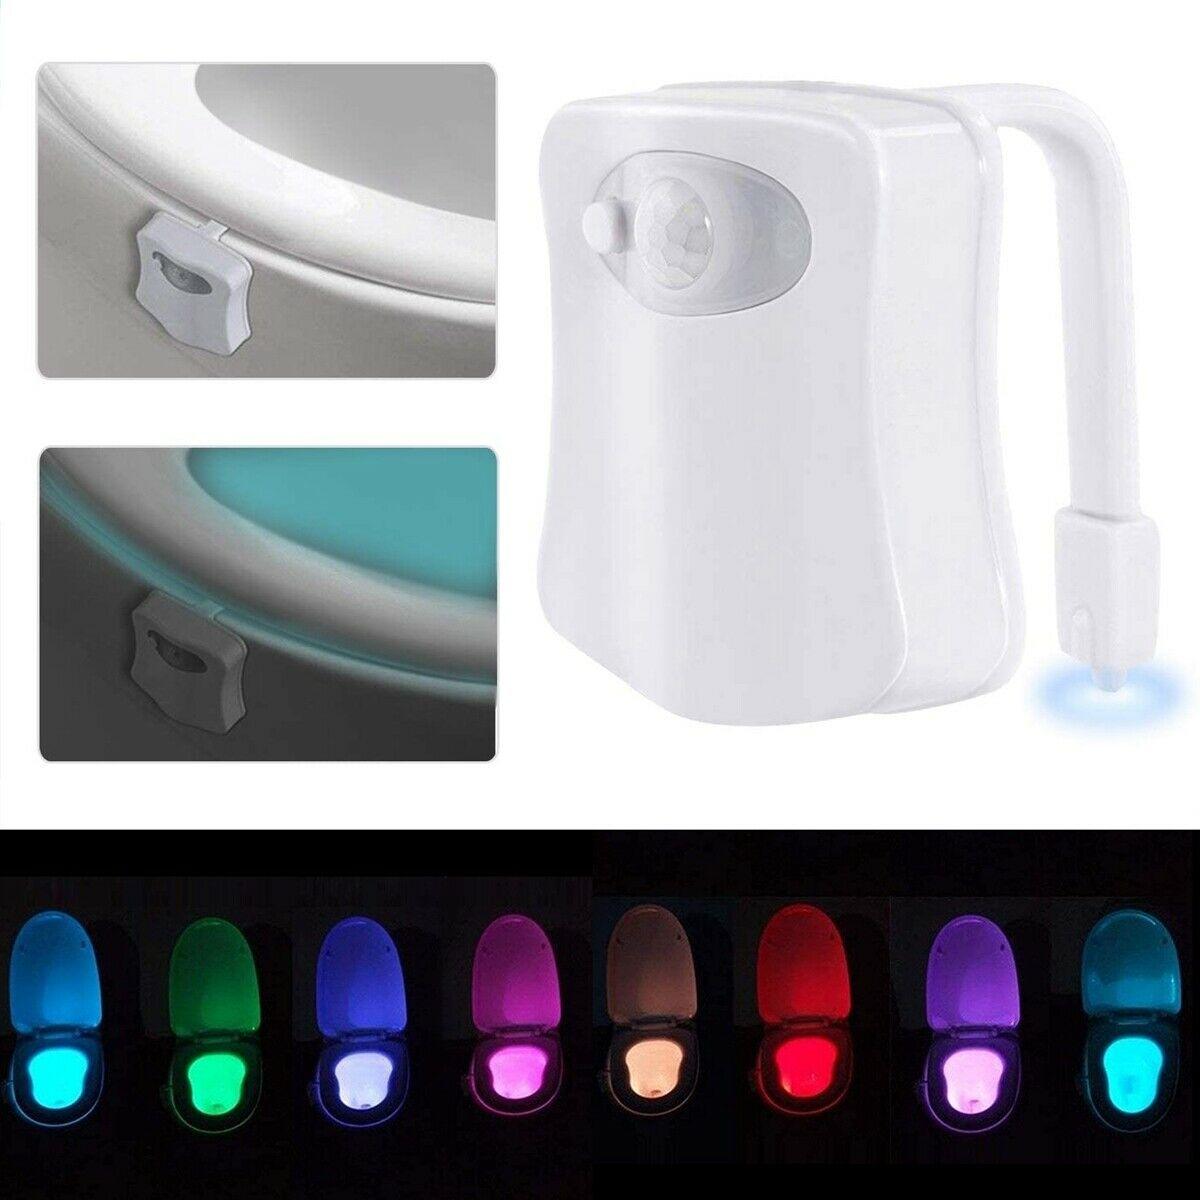 Toilet Bowl Bathroom LED Motion Seat Sensor Night Light With 8 Colour - Office Catch